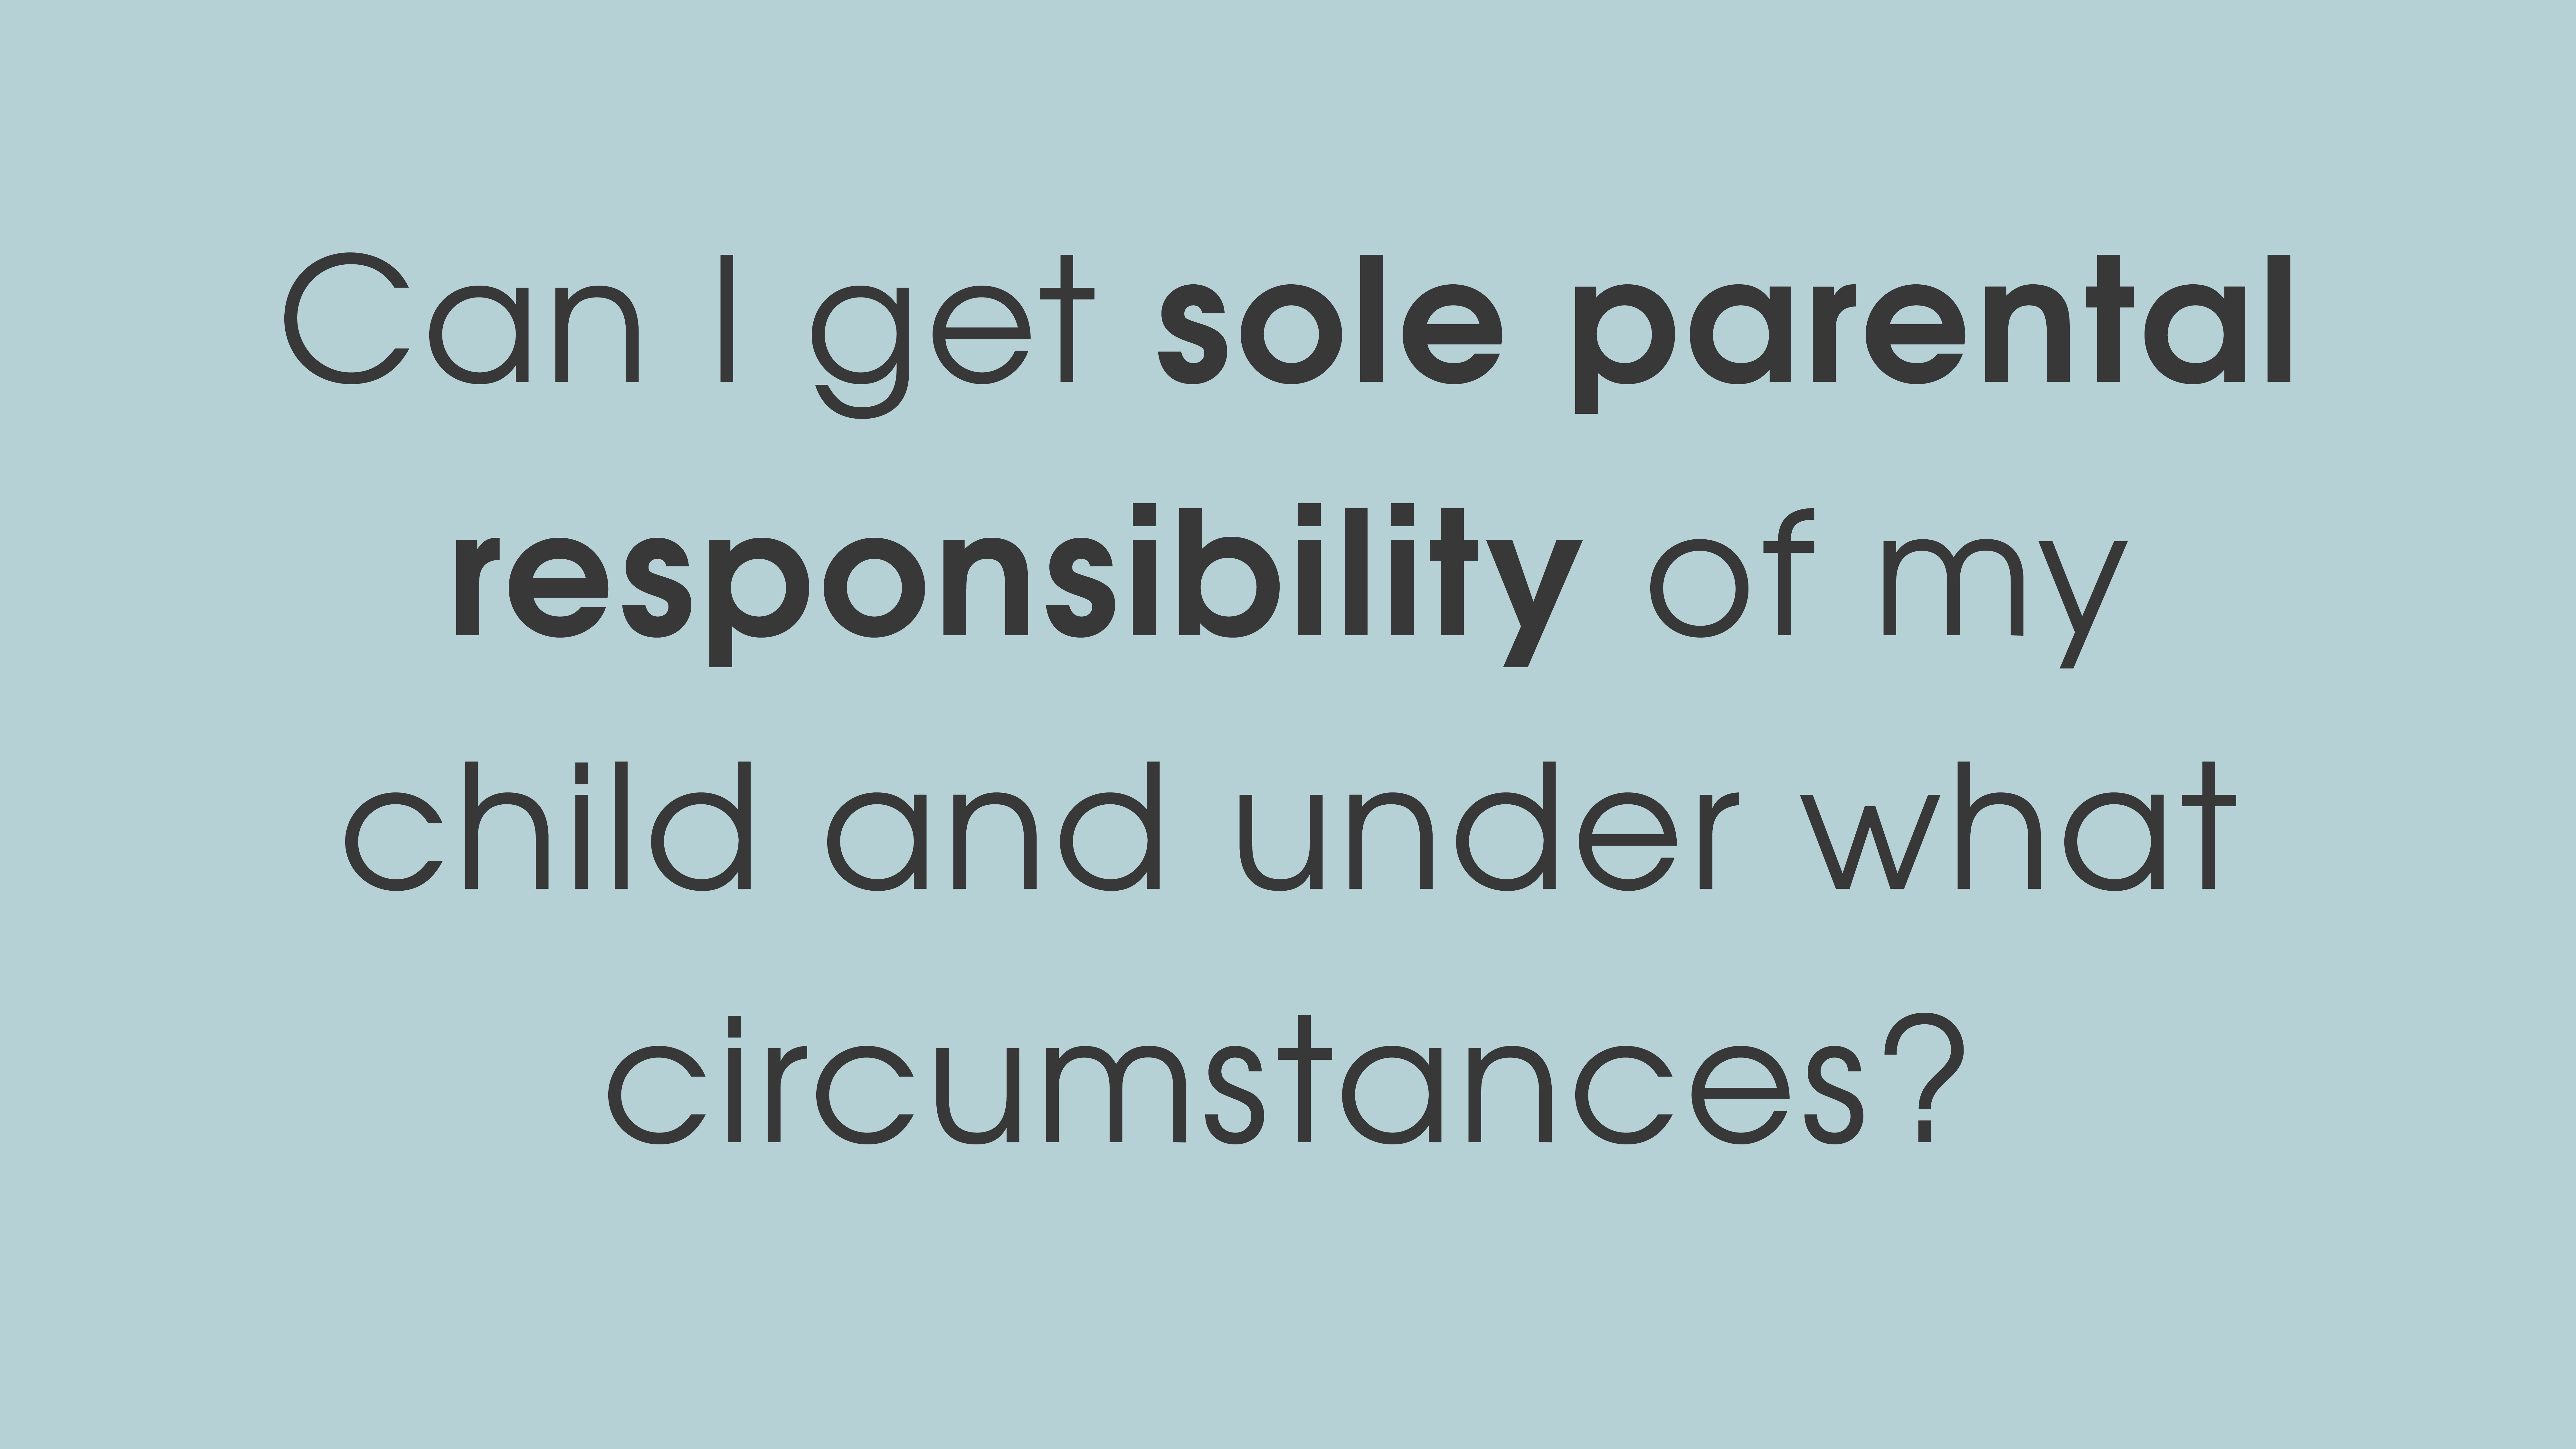 Can I get sole parental responsibility of my child and under what circumstances?